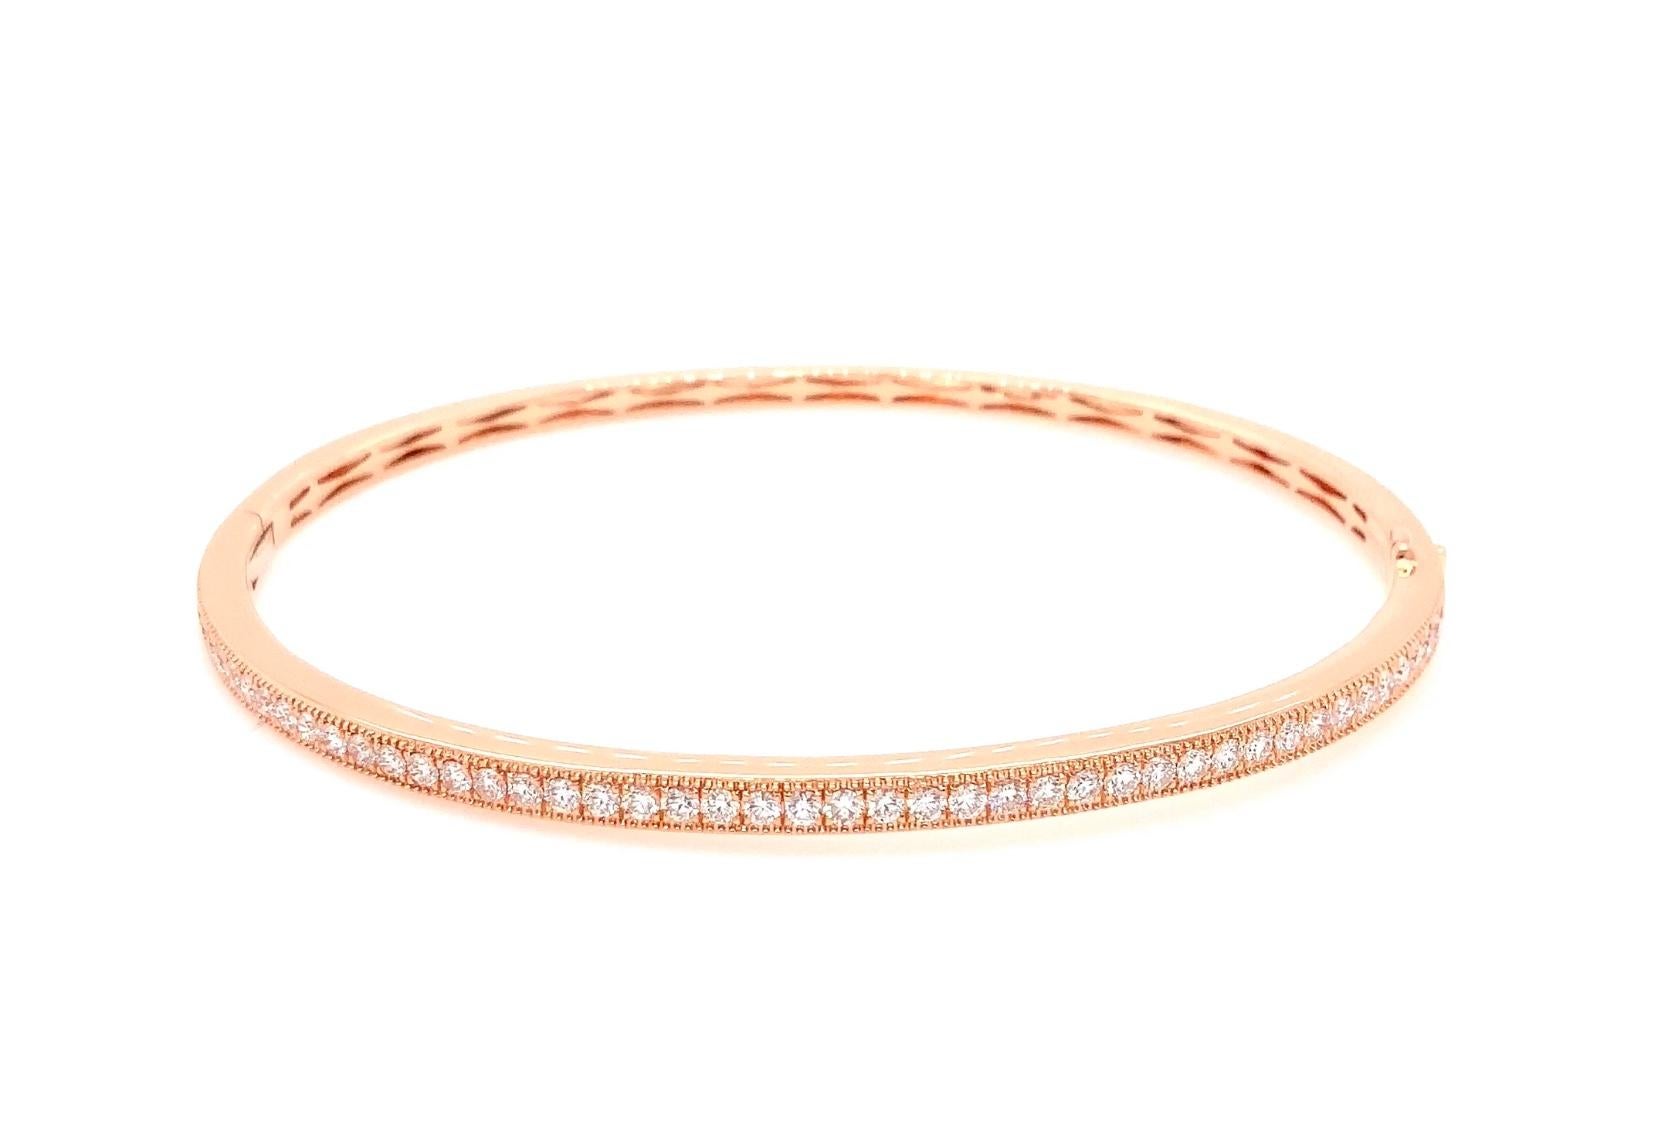 This Memoire Milgrain Hinge Bangle features 46 Round Brilliant Cut Diamonds that weigh 0.85 ctw. Its width measures 3mm, with a wrist diameter of 2.5 inches and a weight of 10.6 grams. This bangle offers a stylish look whether worn alone or stacked